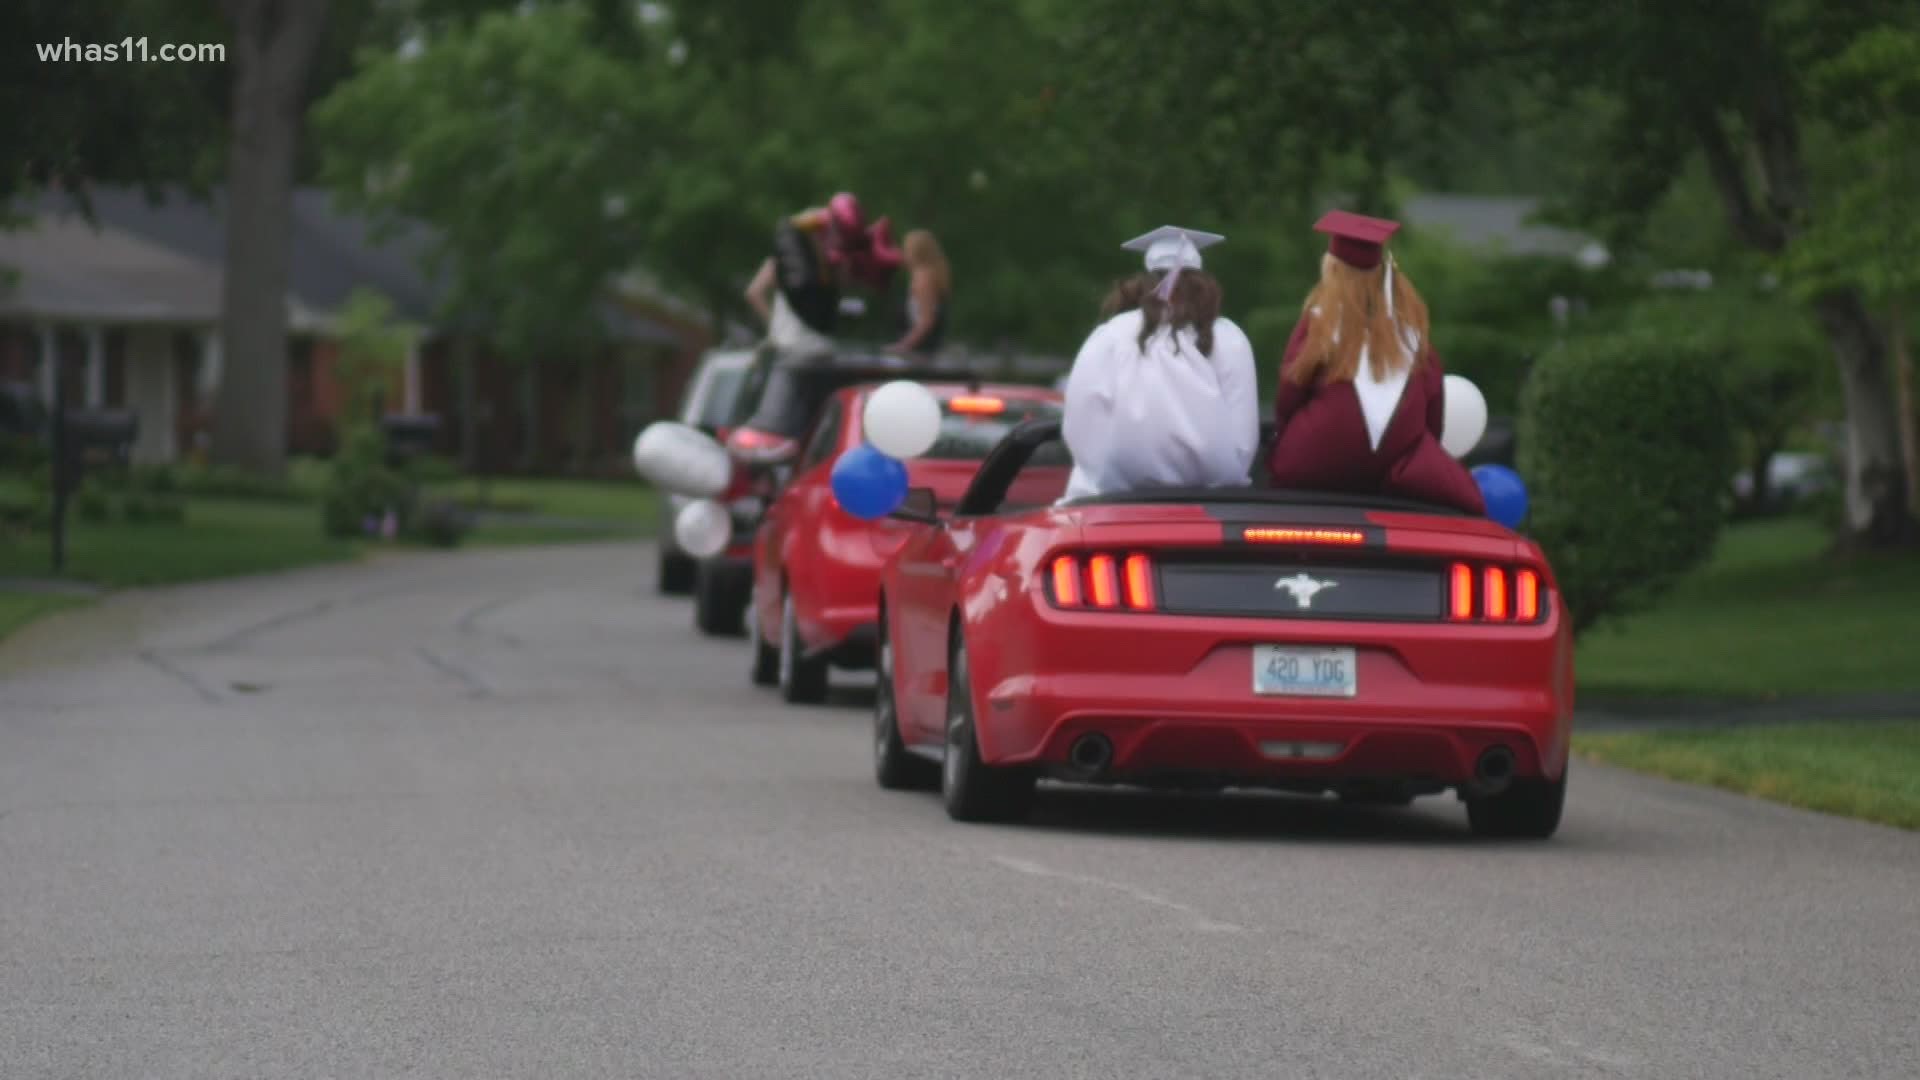 The community of Brownsboro Farm honored it's high school and college seniors with a parade. WHAS11 found this story on the Nextdoor app, thanks to Amy McNeil.